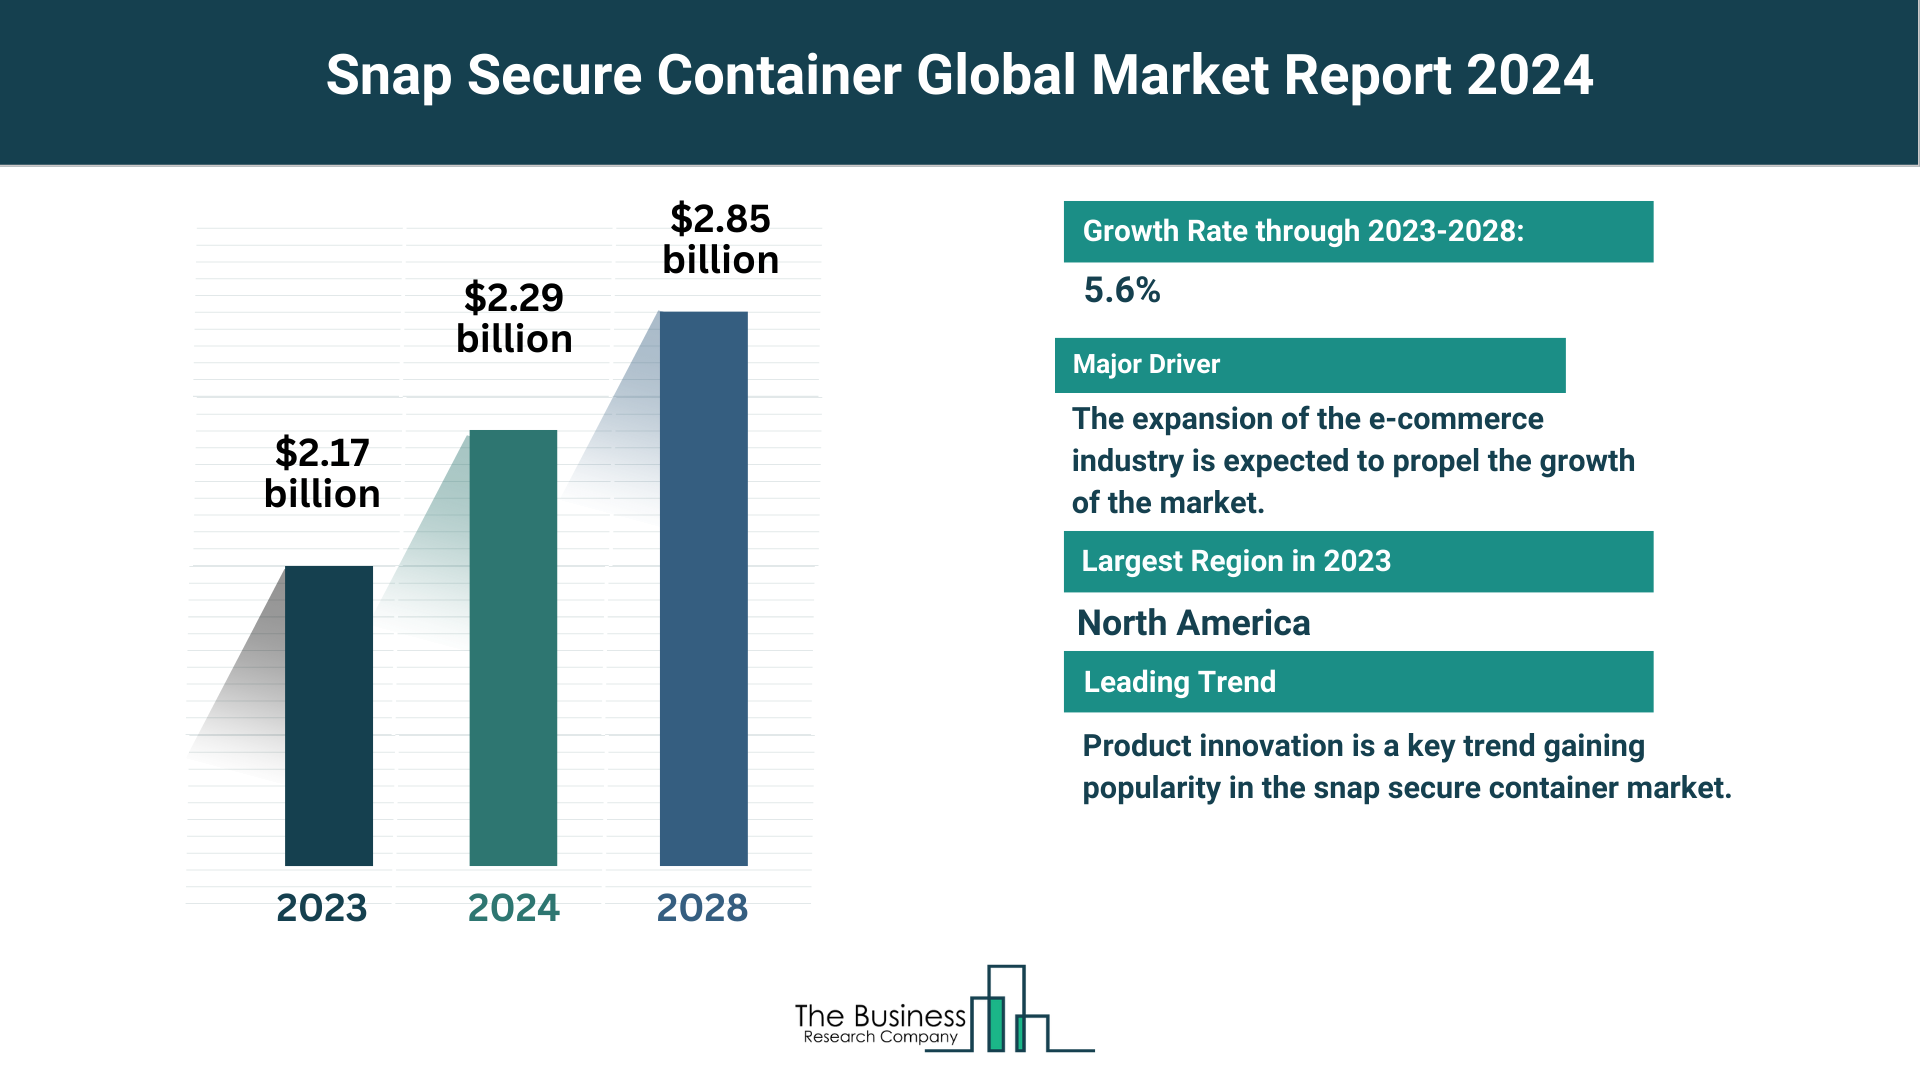 Global Snap Secure Container Market